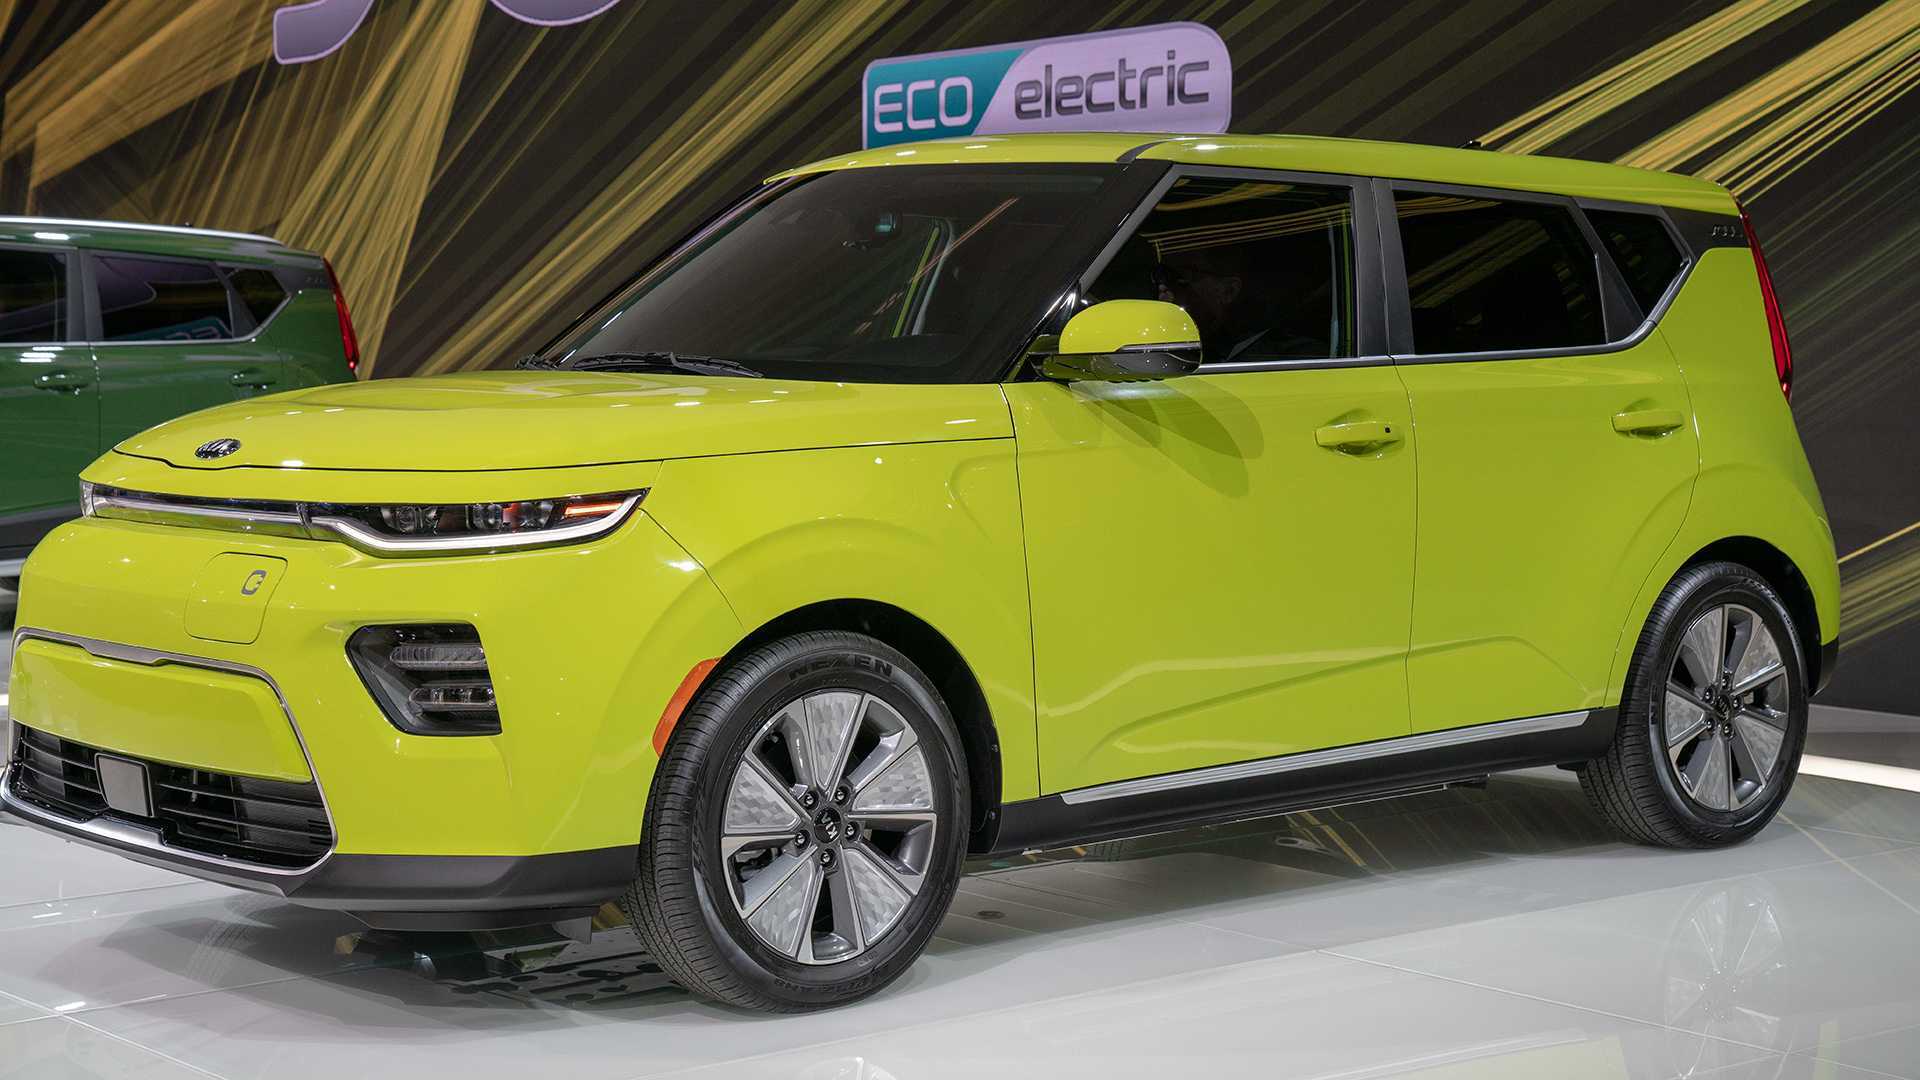 2020 Kia Soul Revealed With Sporty And Rugged Versions [UPDATE]